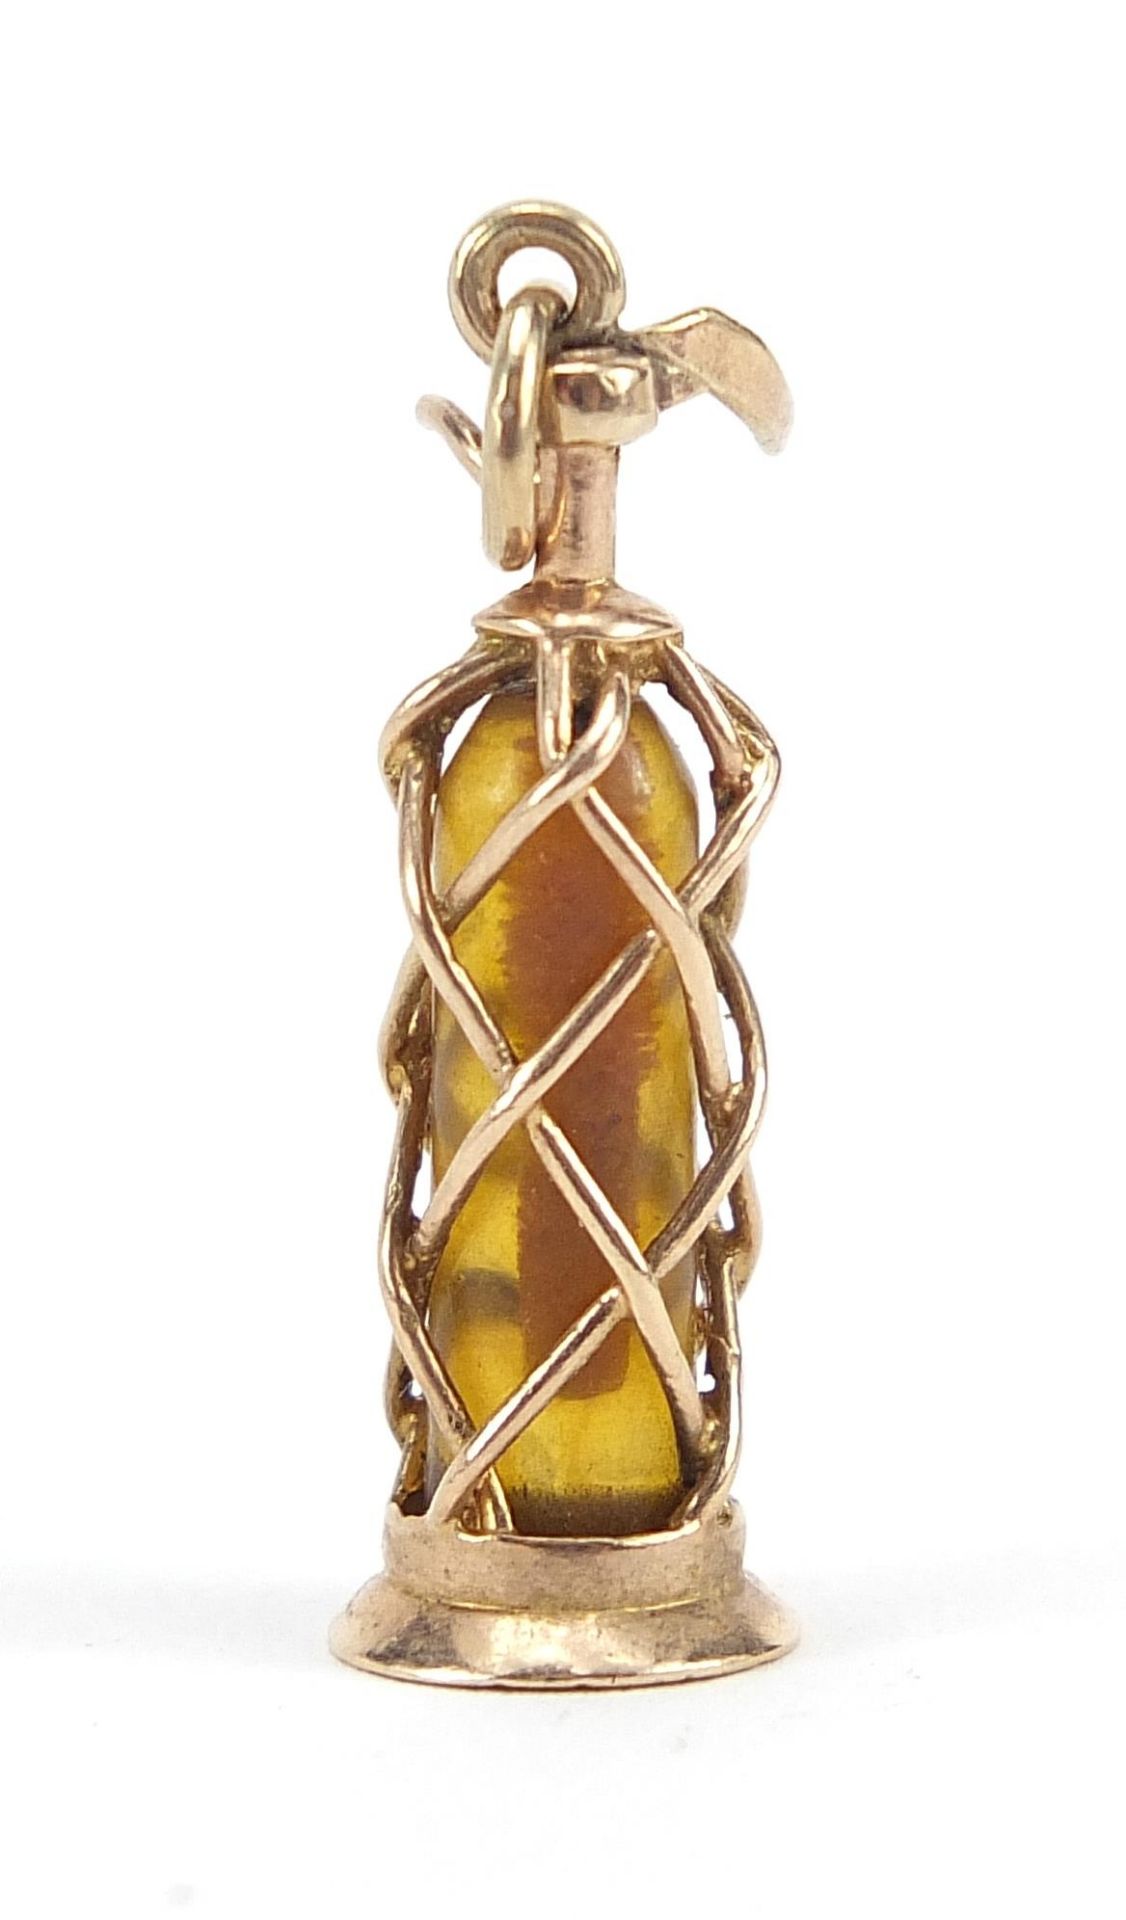 9ct gold soda syphon charm, 2.6cm high, 1.6g - Image 3 of 8